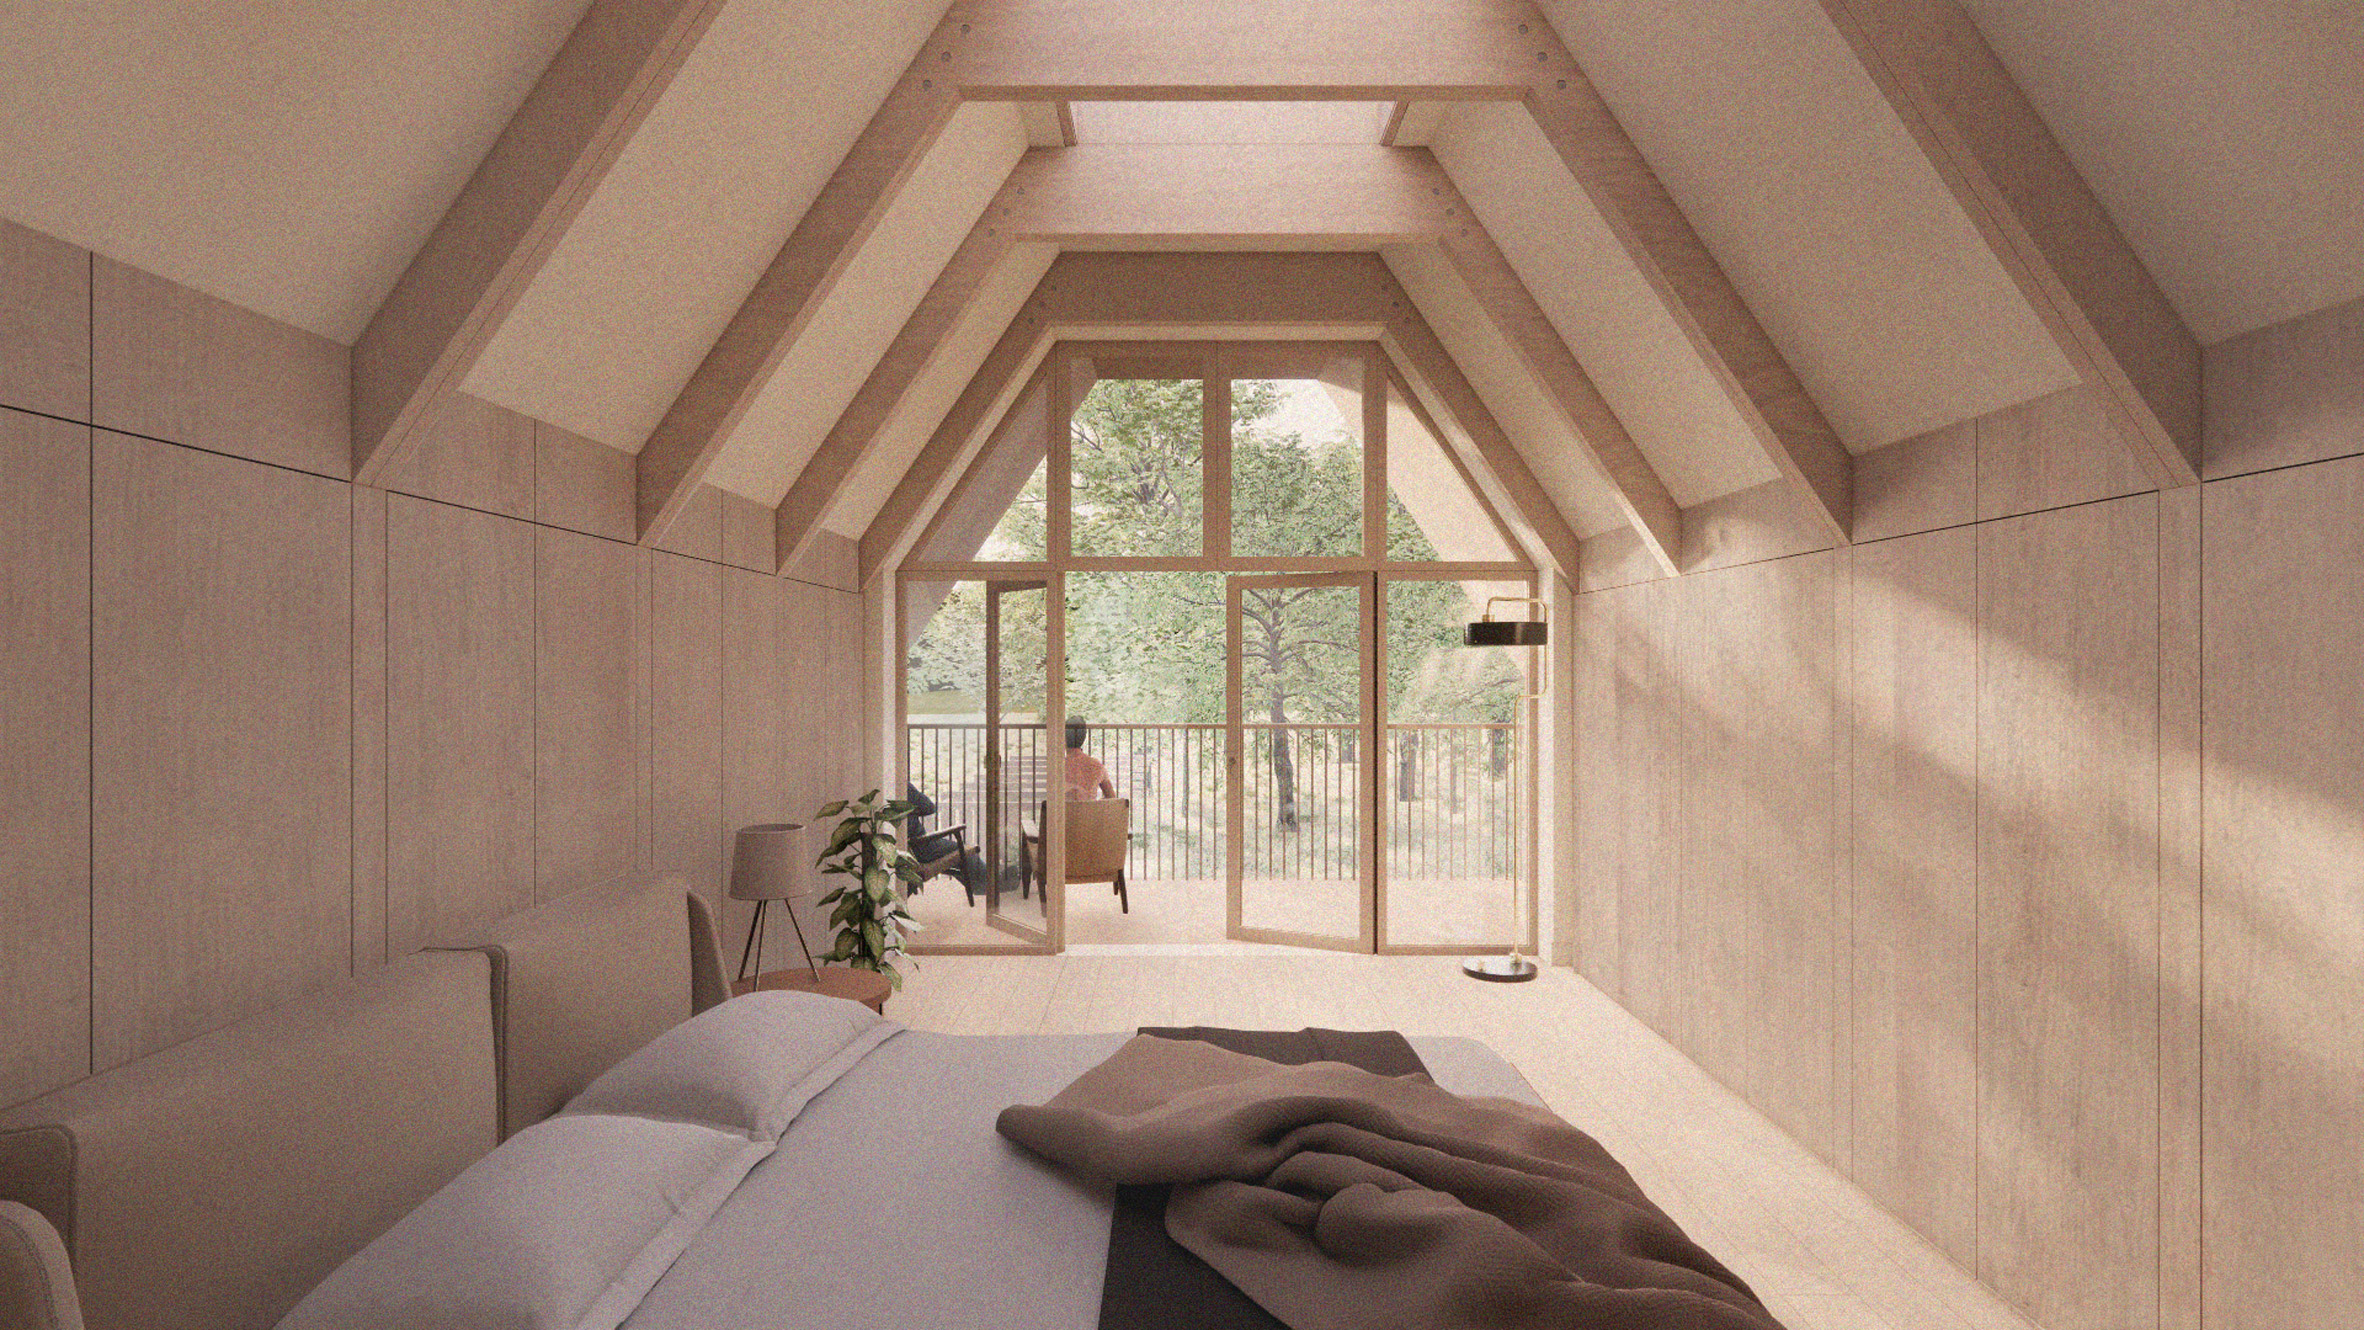 Proposed bedroom interior within Breach House by Studio Bark